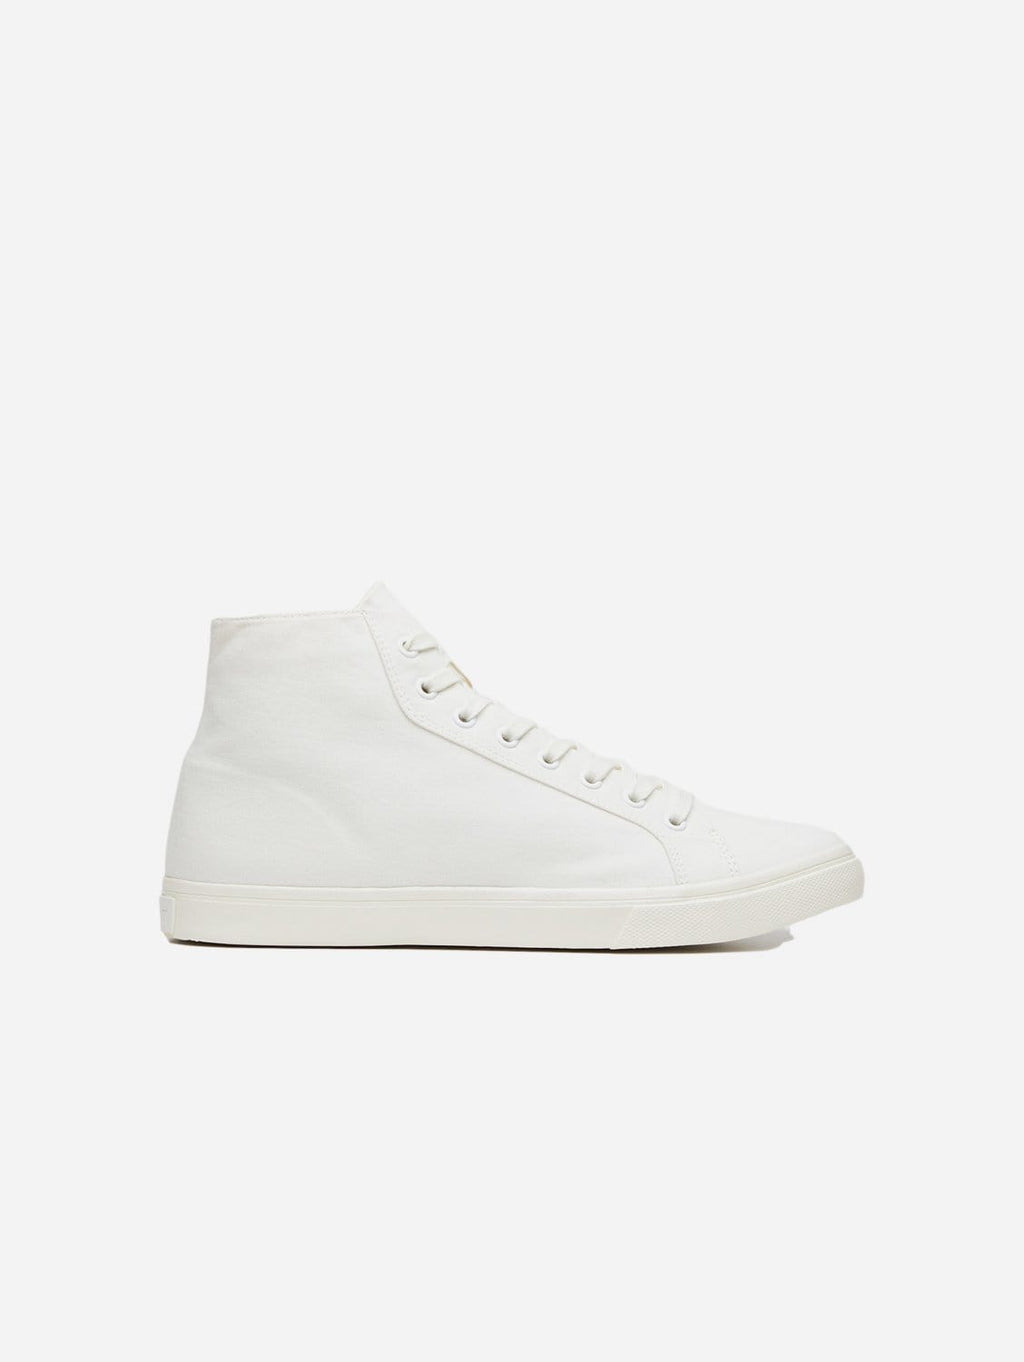 Climate Positive Recycled Canvas High-Top Trainer | White/Stripes ...